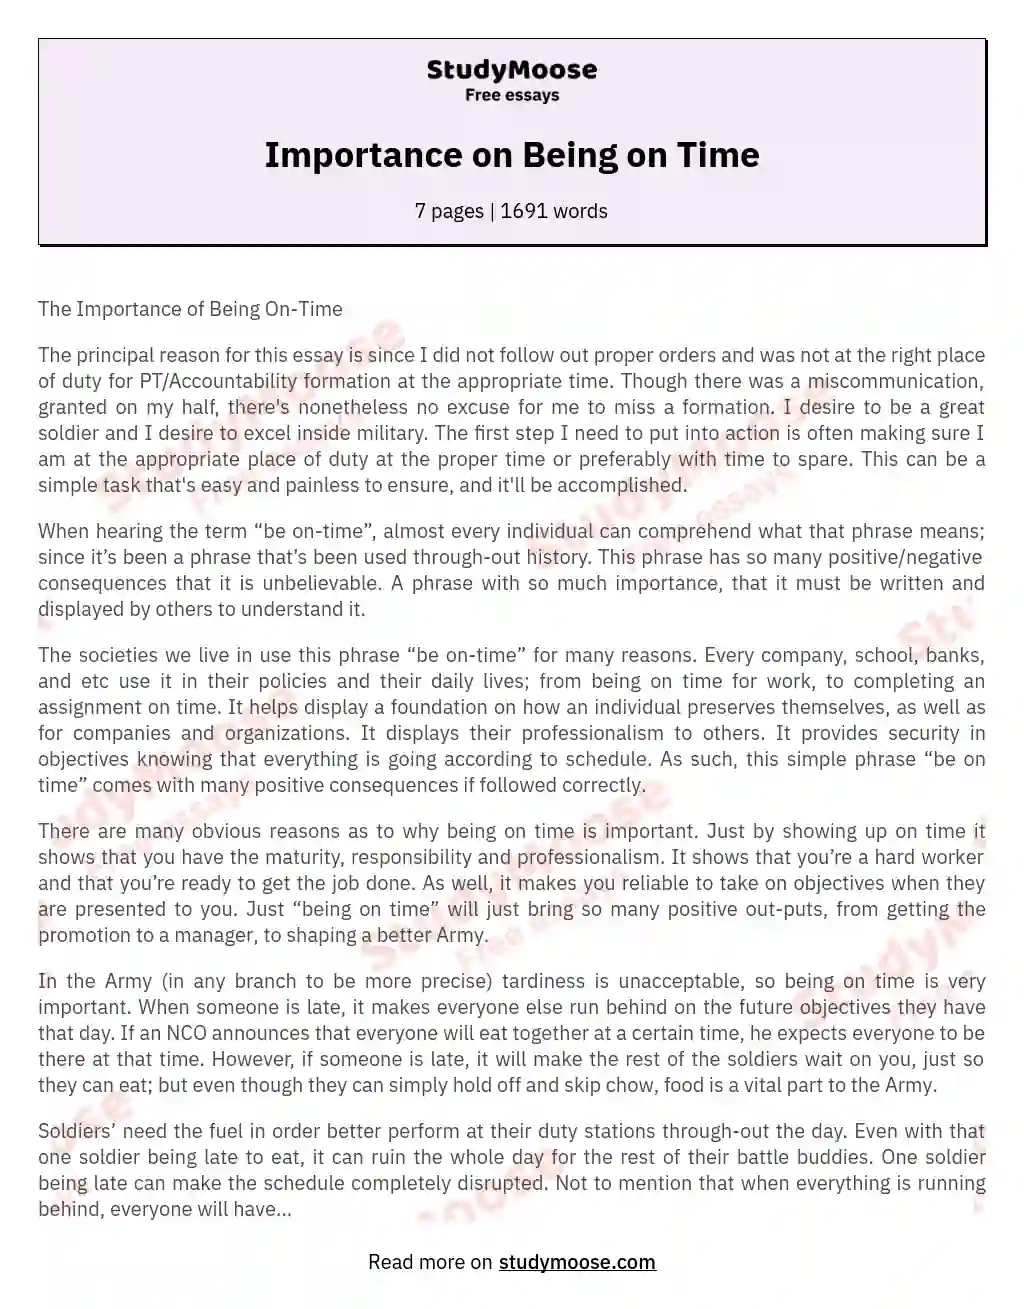 Importance on Being on Time essay